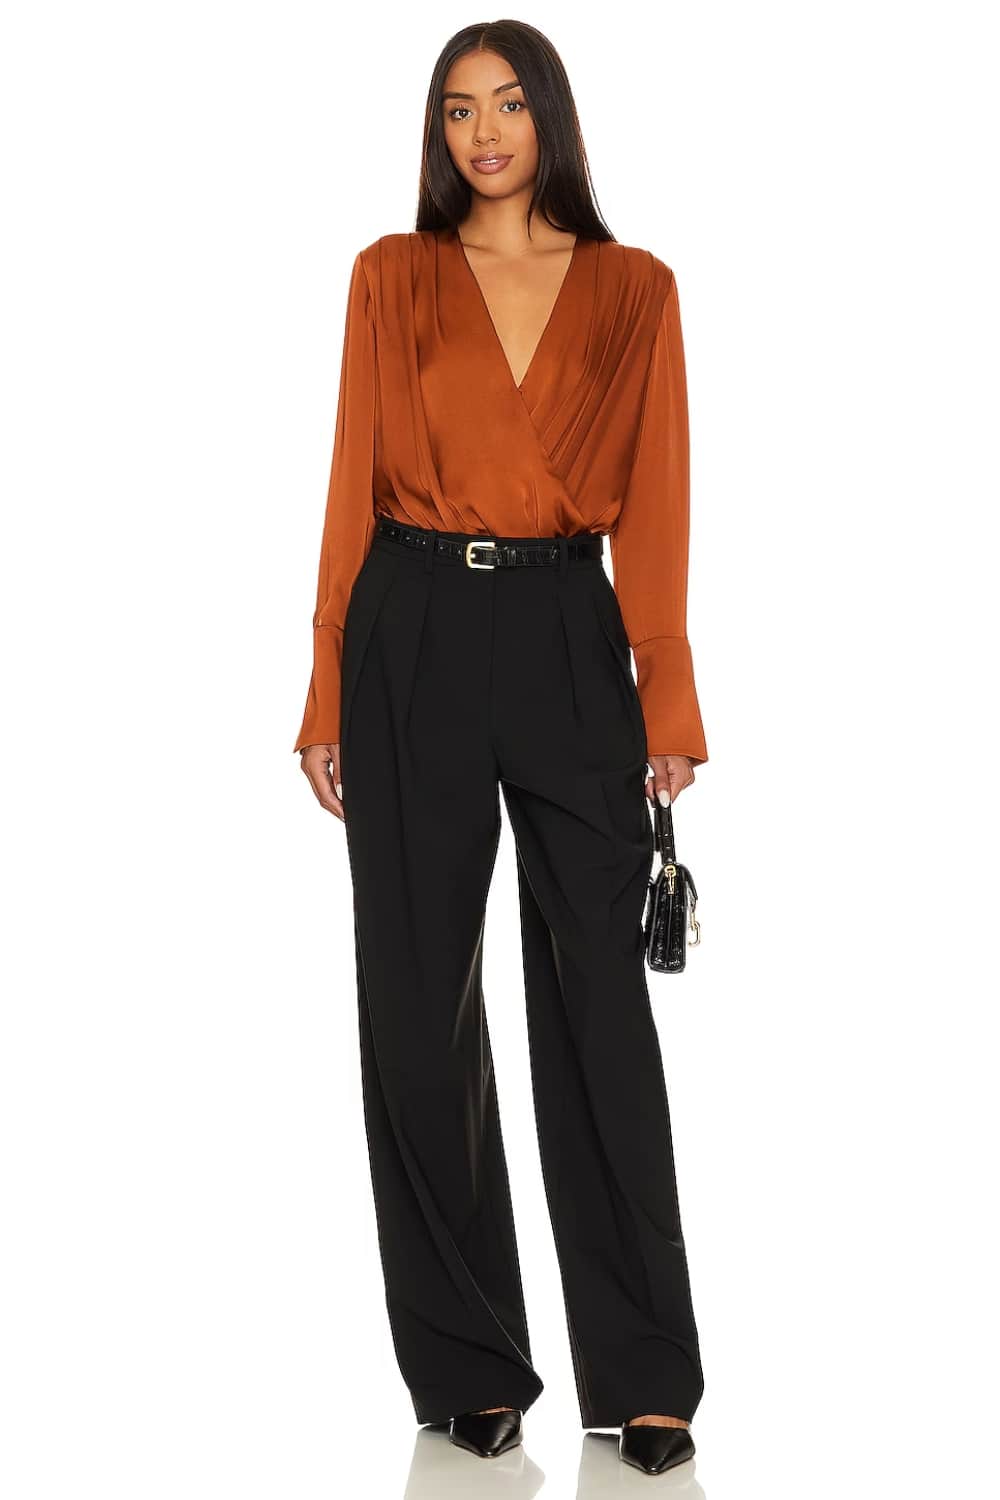 Bar outfit for ladies with wrap top and pants